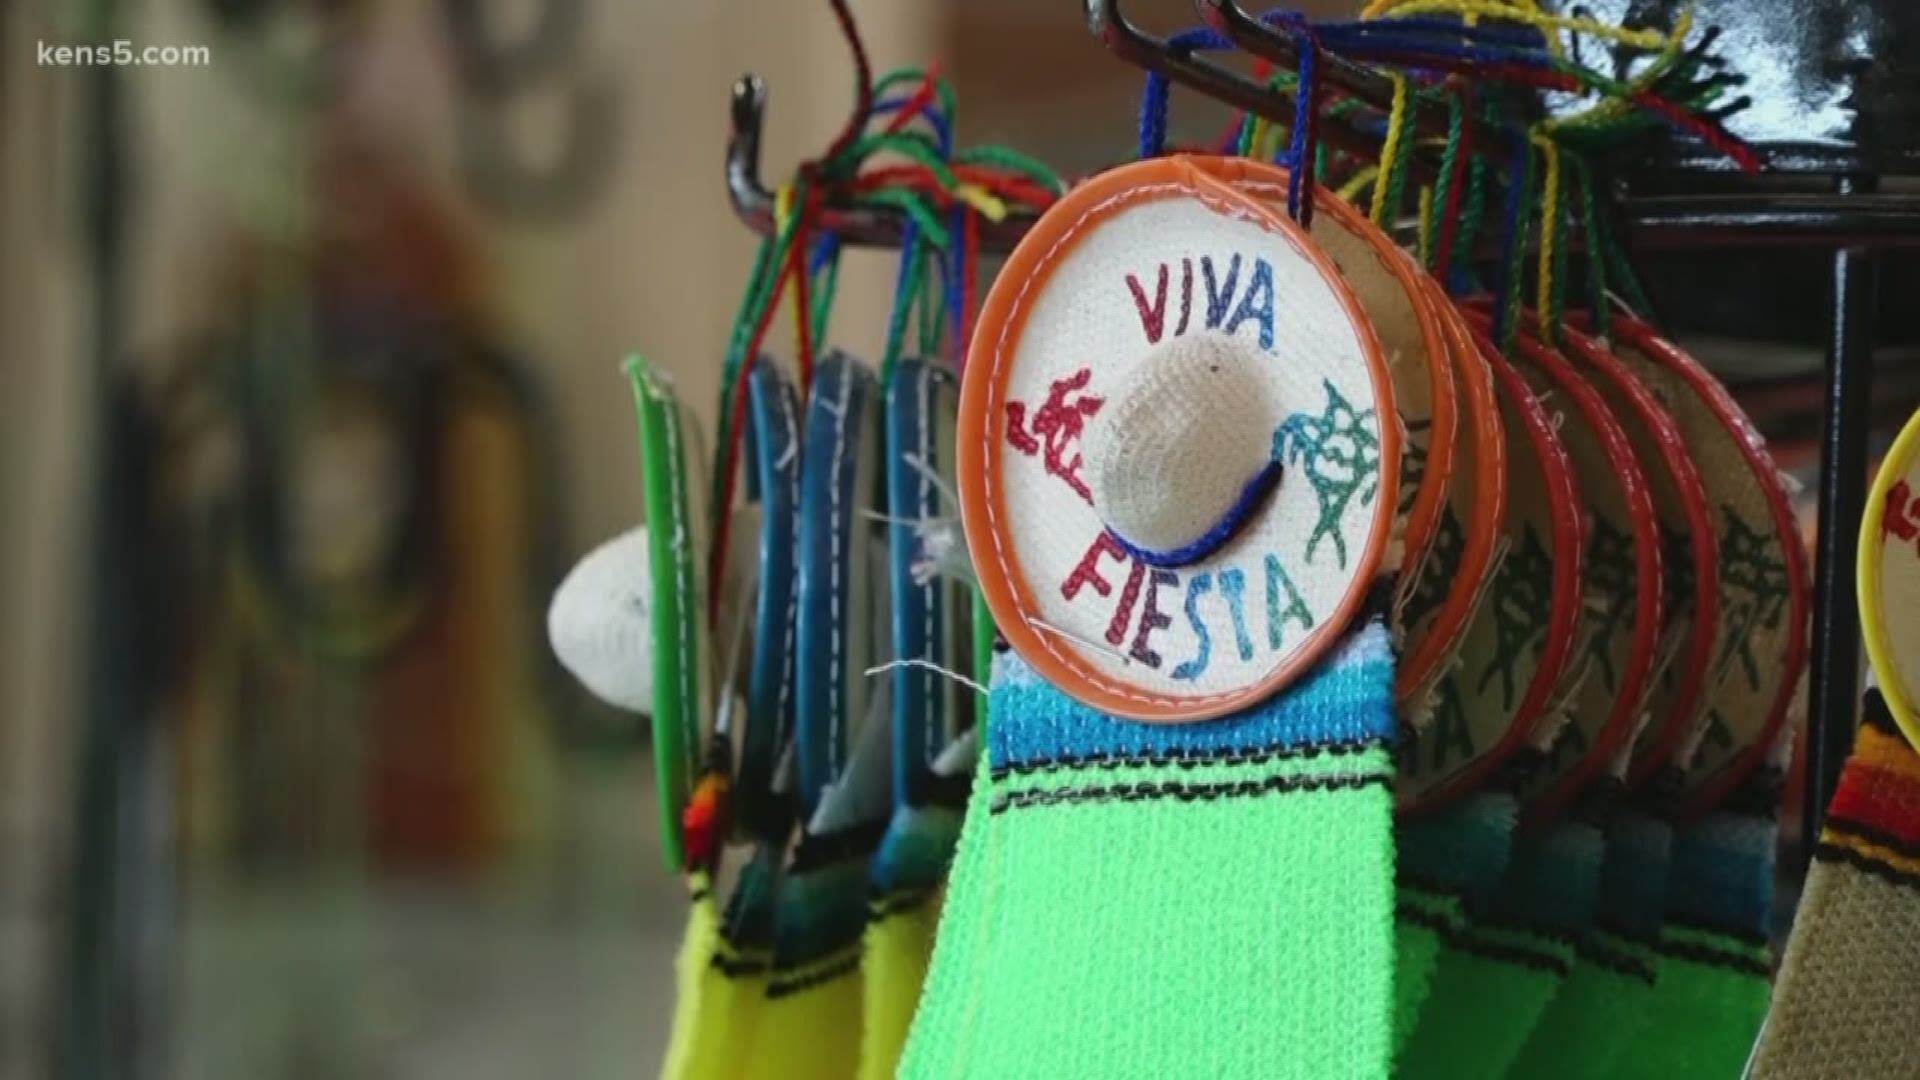 Viva Fiesta - the city's largest festival officially kicks off Thursday but Fiesta medal sales have been going on for months. Some of those medals can come at a steep price.